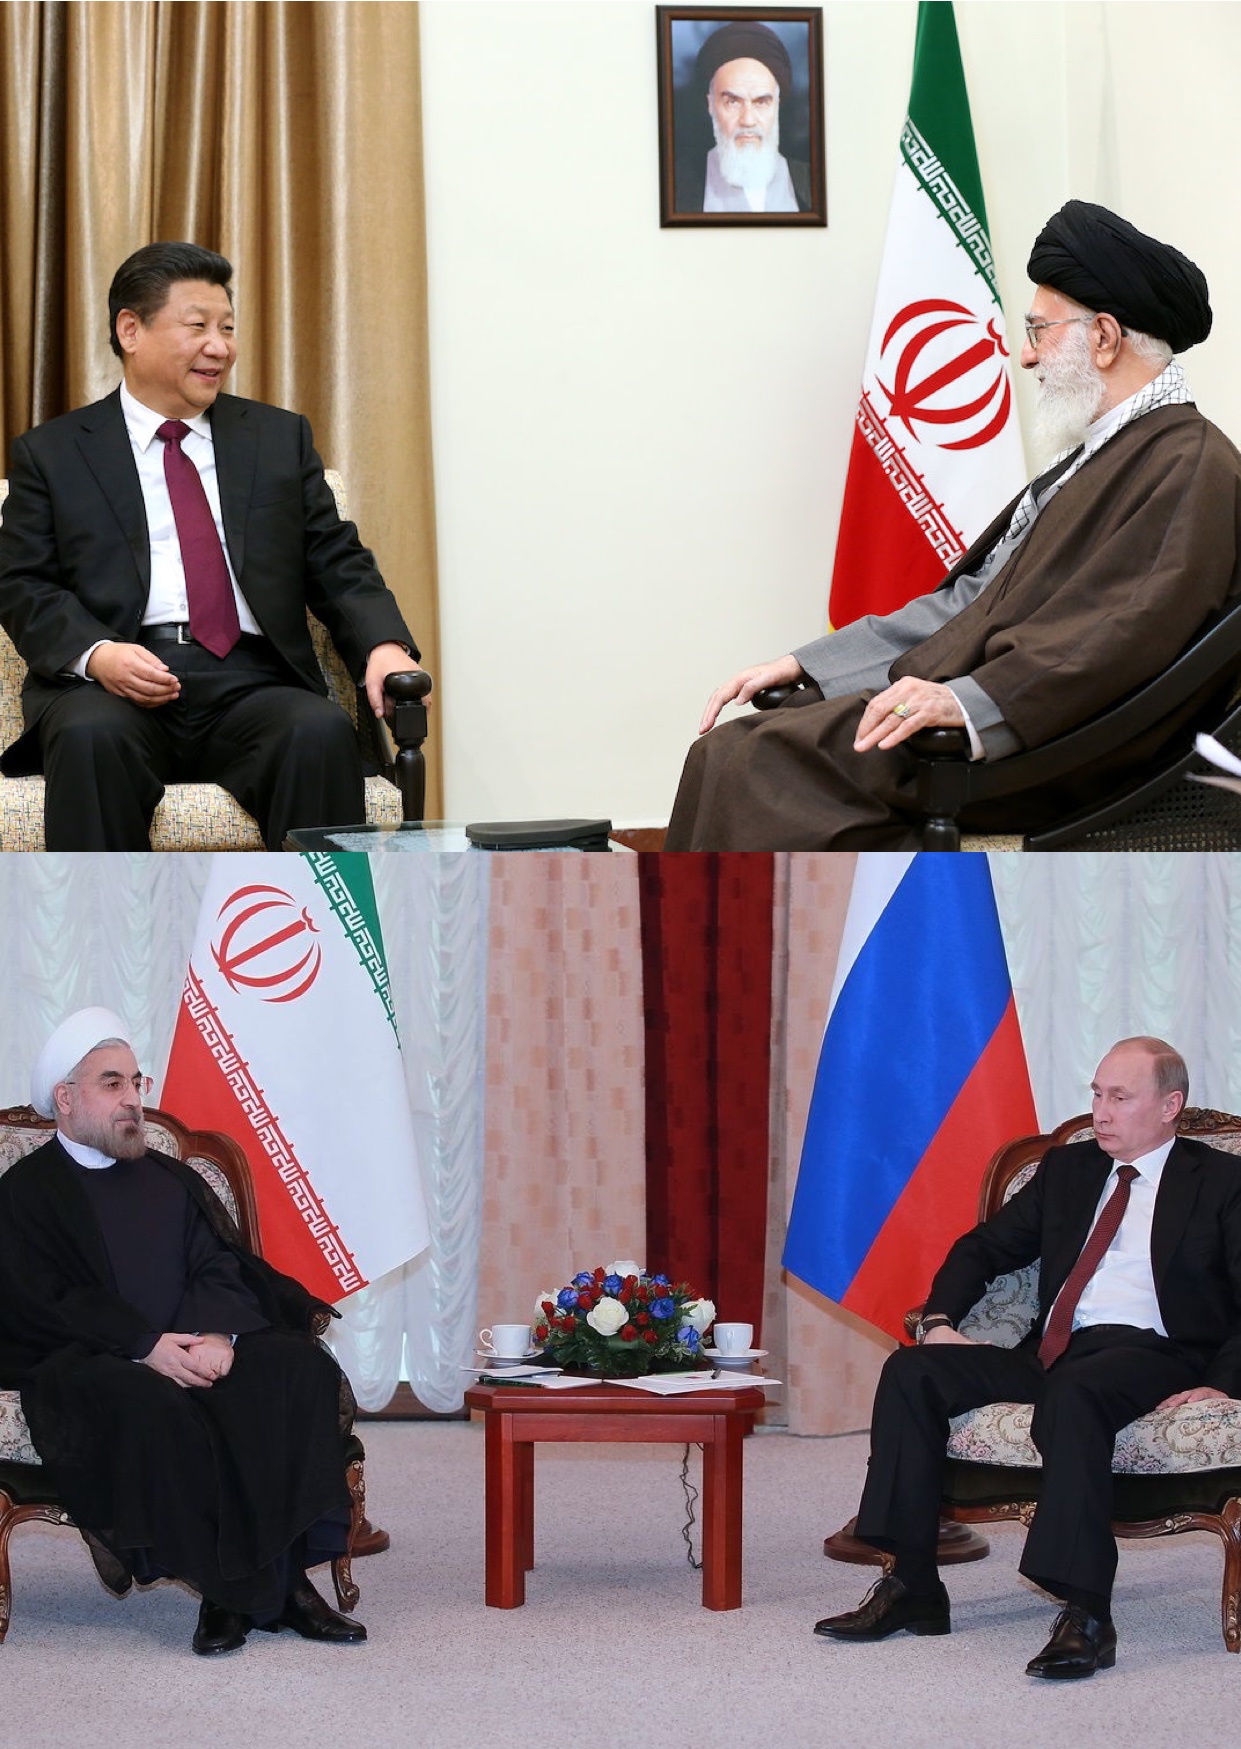 On top, Ali Khamenei, the Supreme Leader of Iran, meeting with Chinese President Xi Jinping on January 23, 2016. On bottom, Iranian President Hassan Rouhani meeting with Russian President Vladimir Putin on September 13, 2013. Iran, China, and Russia are all strategic allies.